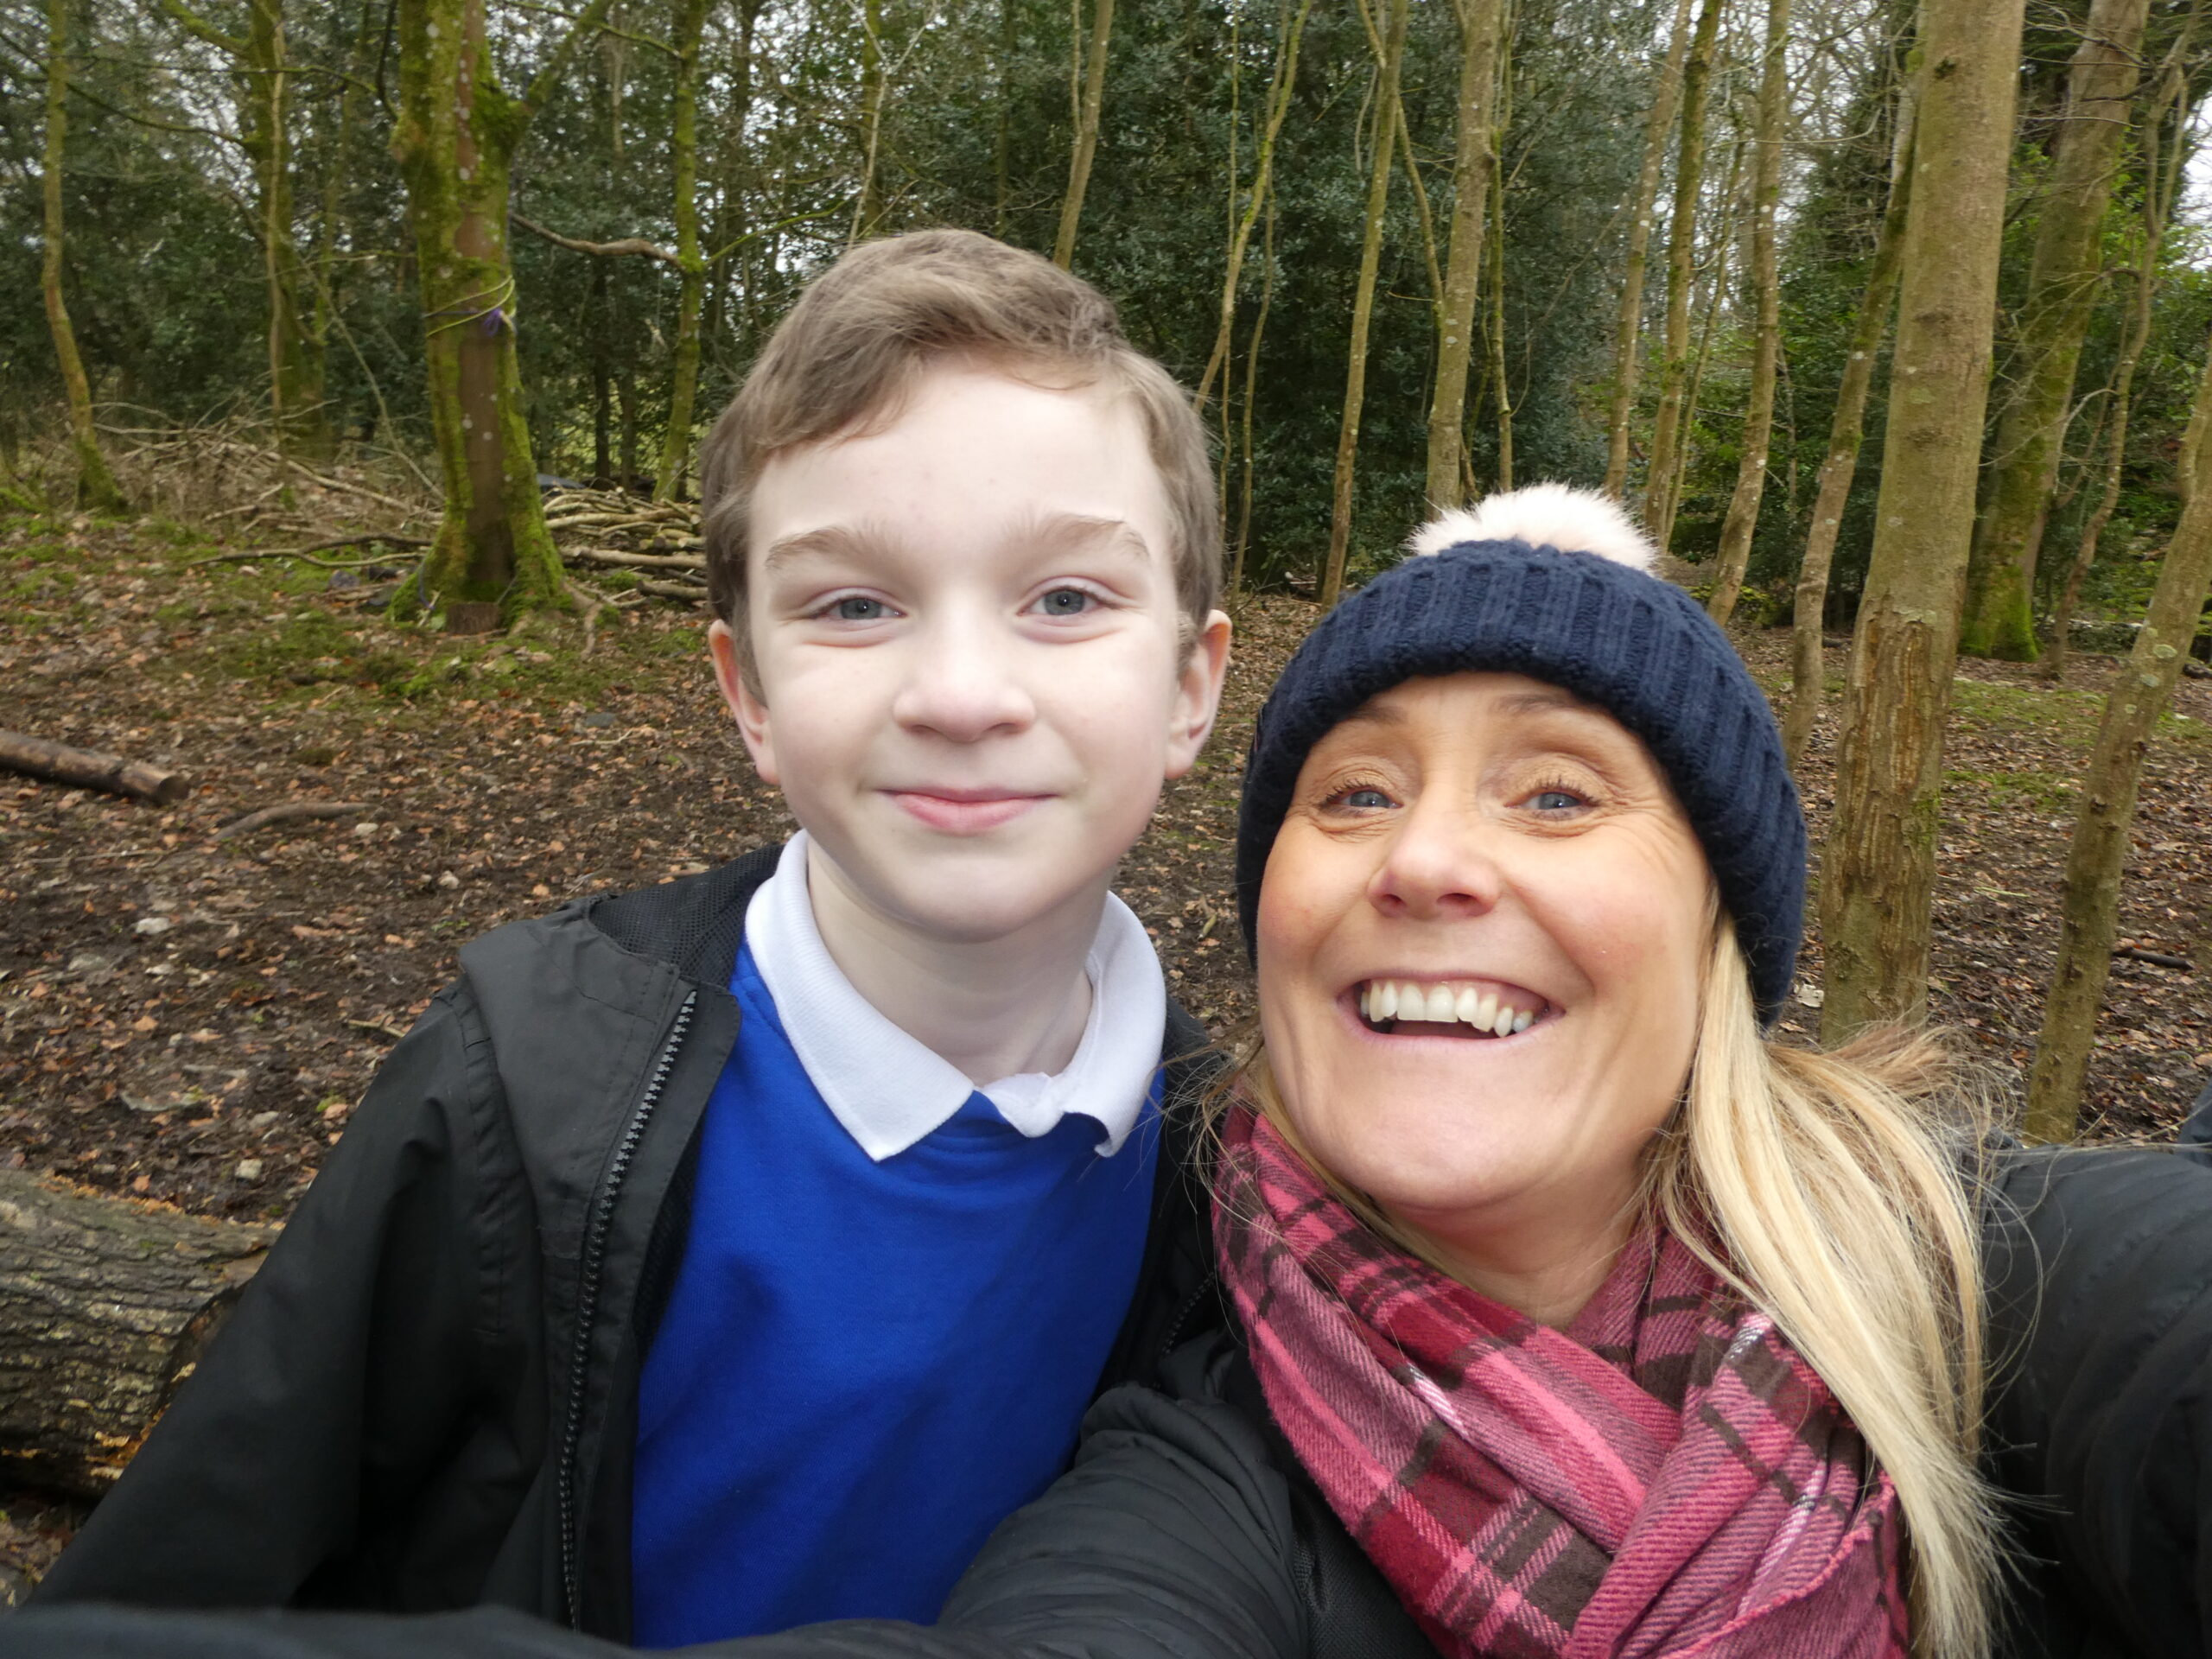 Forest fun at Leighton Hall